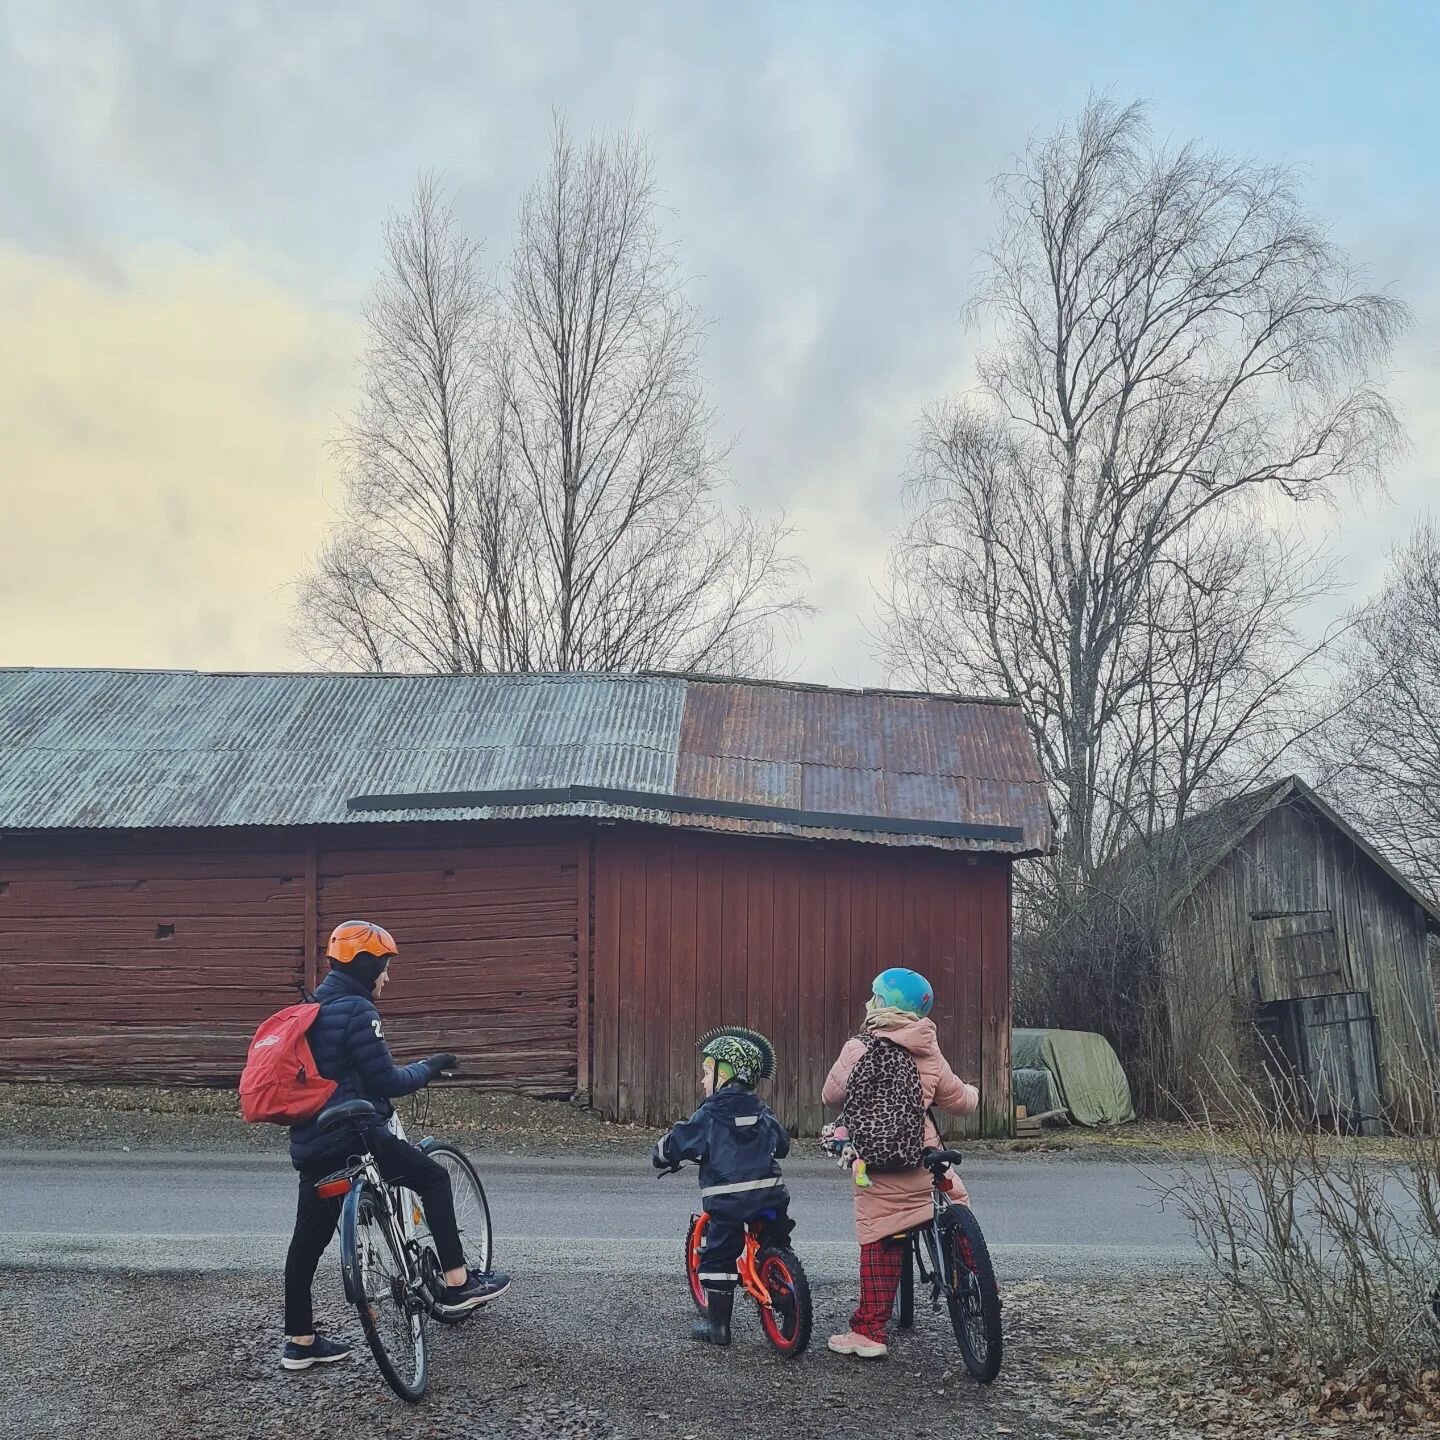 Now, this is a sure sign of spring 🚲

The freedom that clear roads and warmer weather bring is pretty unbeatable. The kids feel so free, and now we have finally arrived at the phase of life where all three kids have the energy and strength to bike t